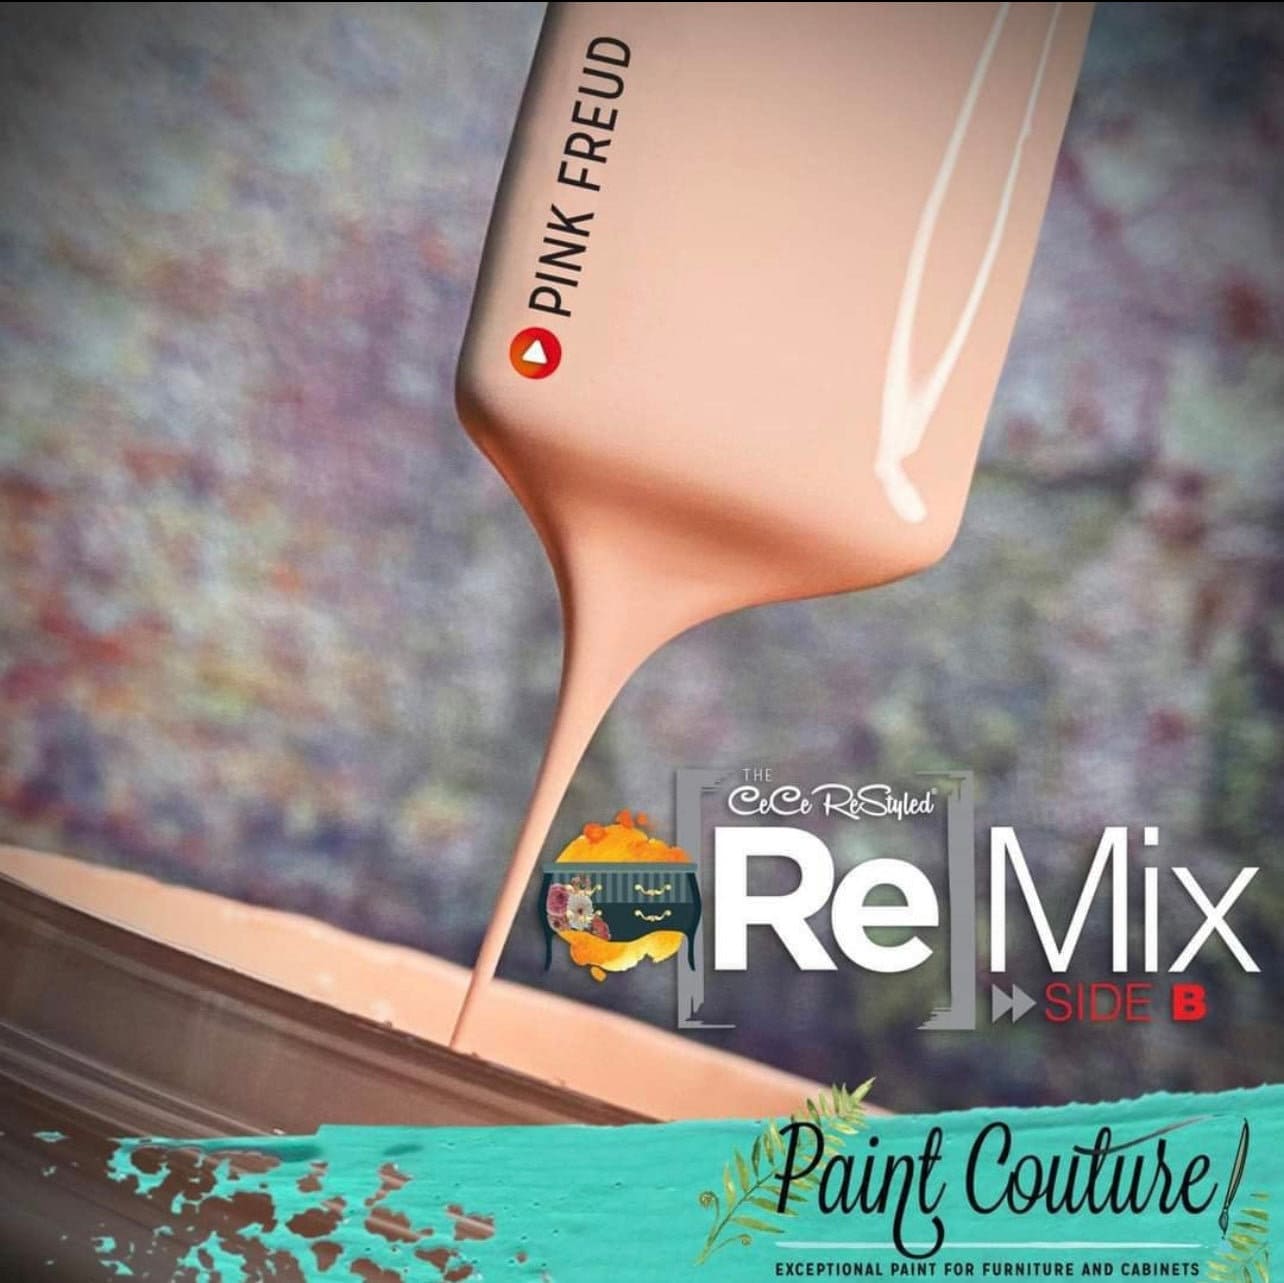 paint-couture-cece-restyled-remix-collection-Pink-Freud